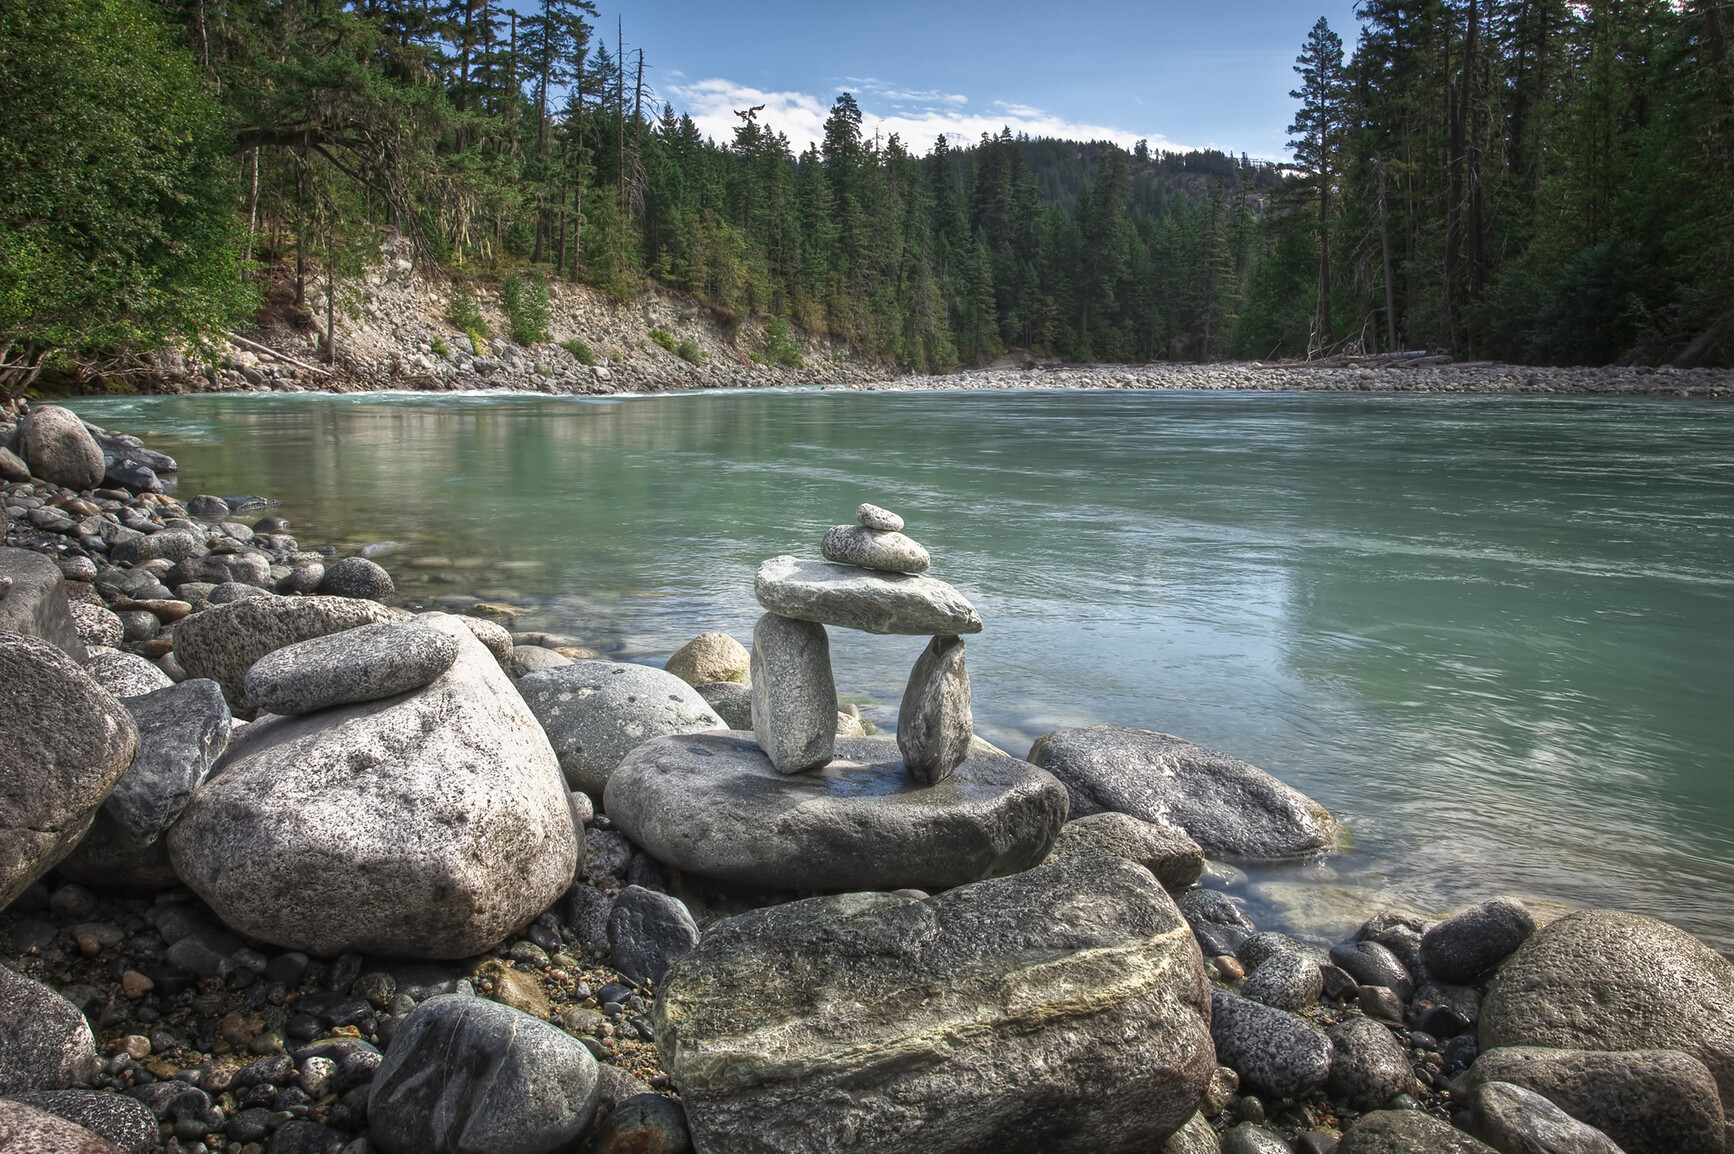 Inukshuk on rocky bank of Green River. Forest can be seen along banks of river.